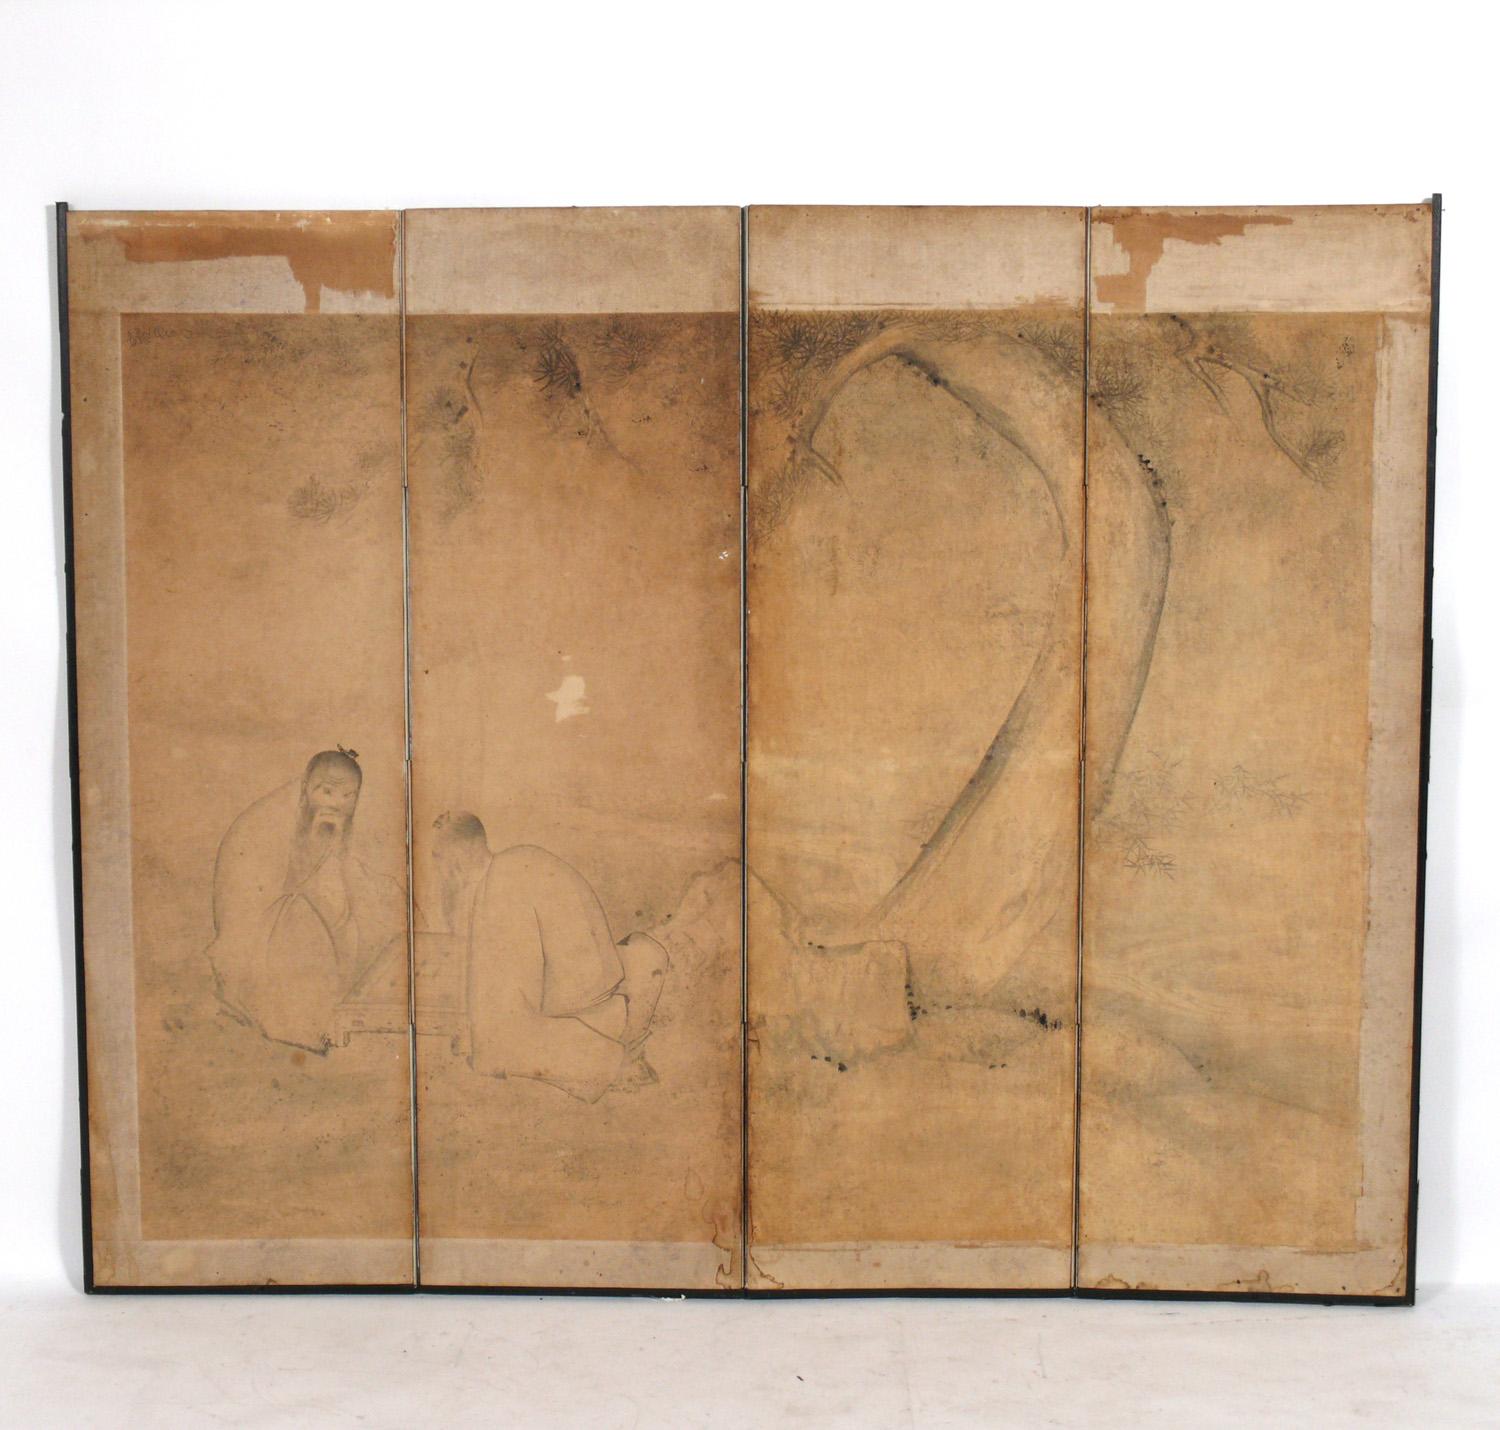 Hand painted Asian folding screen, probably Chinese, believed to be circa 1950s, possibly much earlier. It depicts two scholars playing a game under a flowing tree. As you can see from the photos, there is much wear to the screen, incluidng water